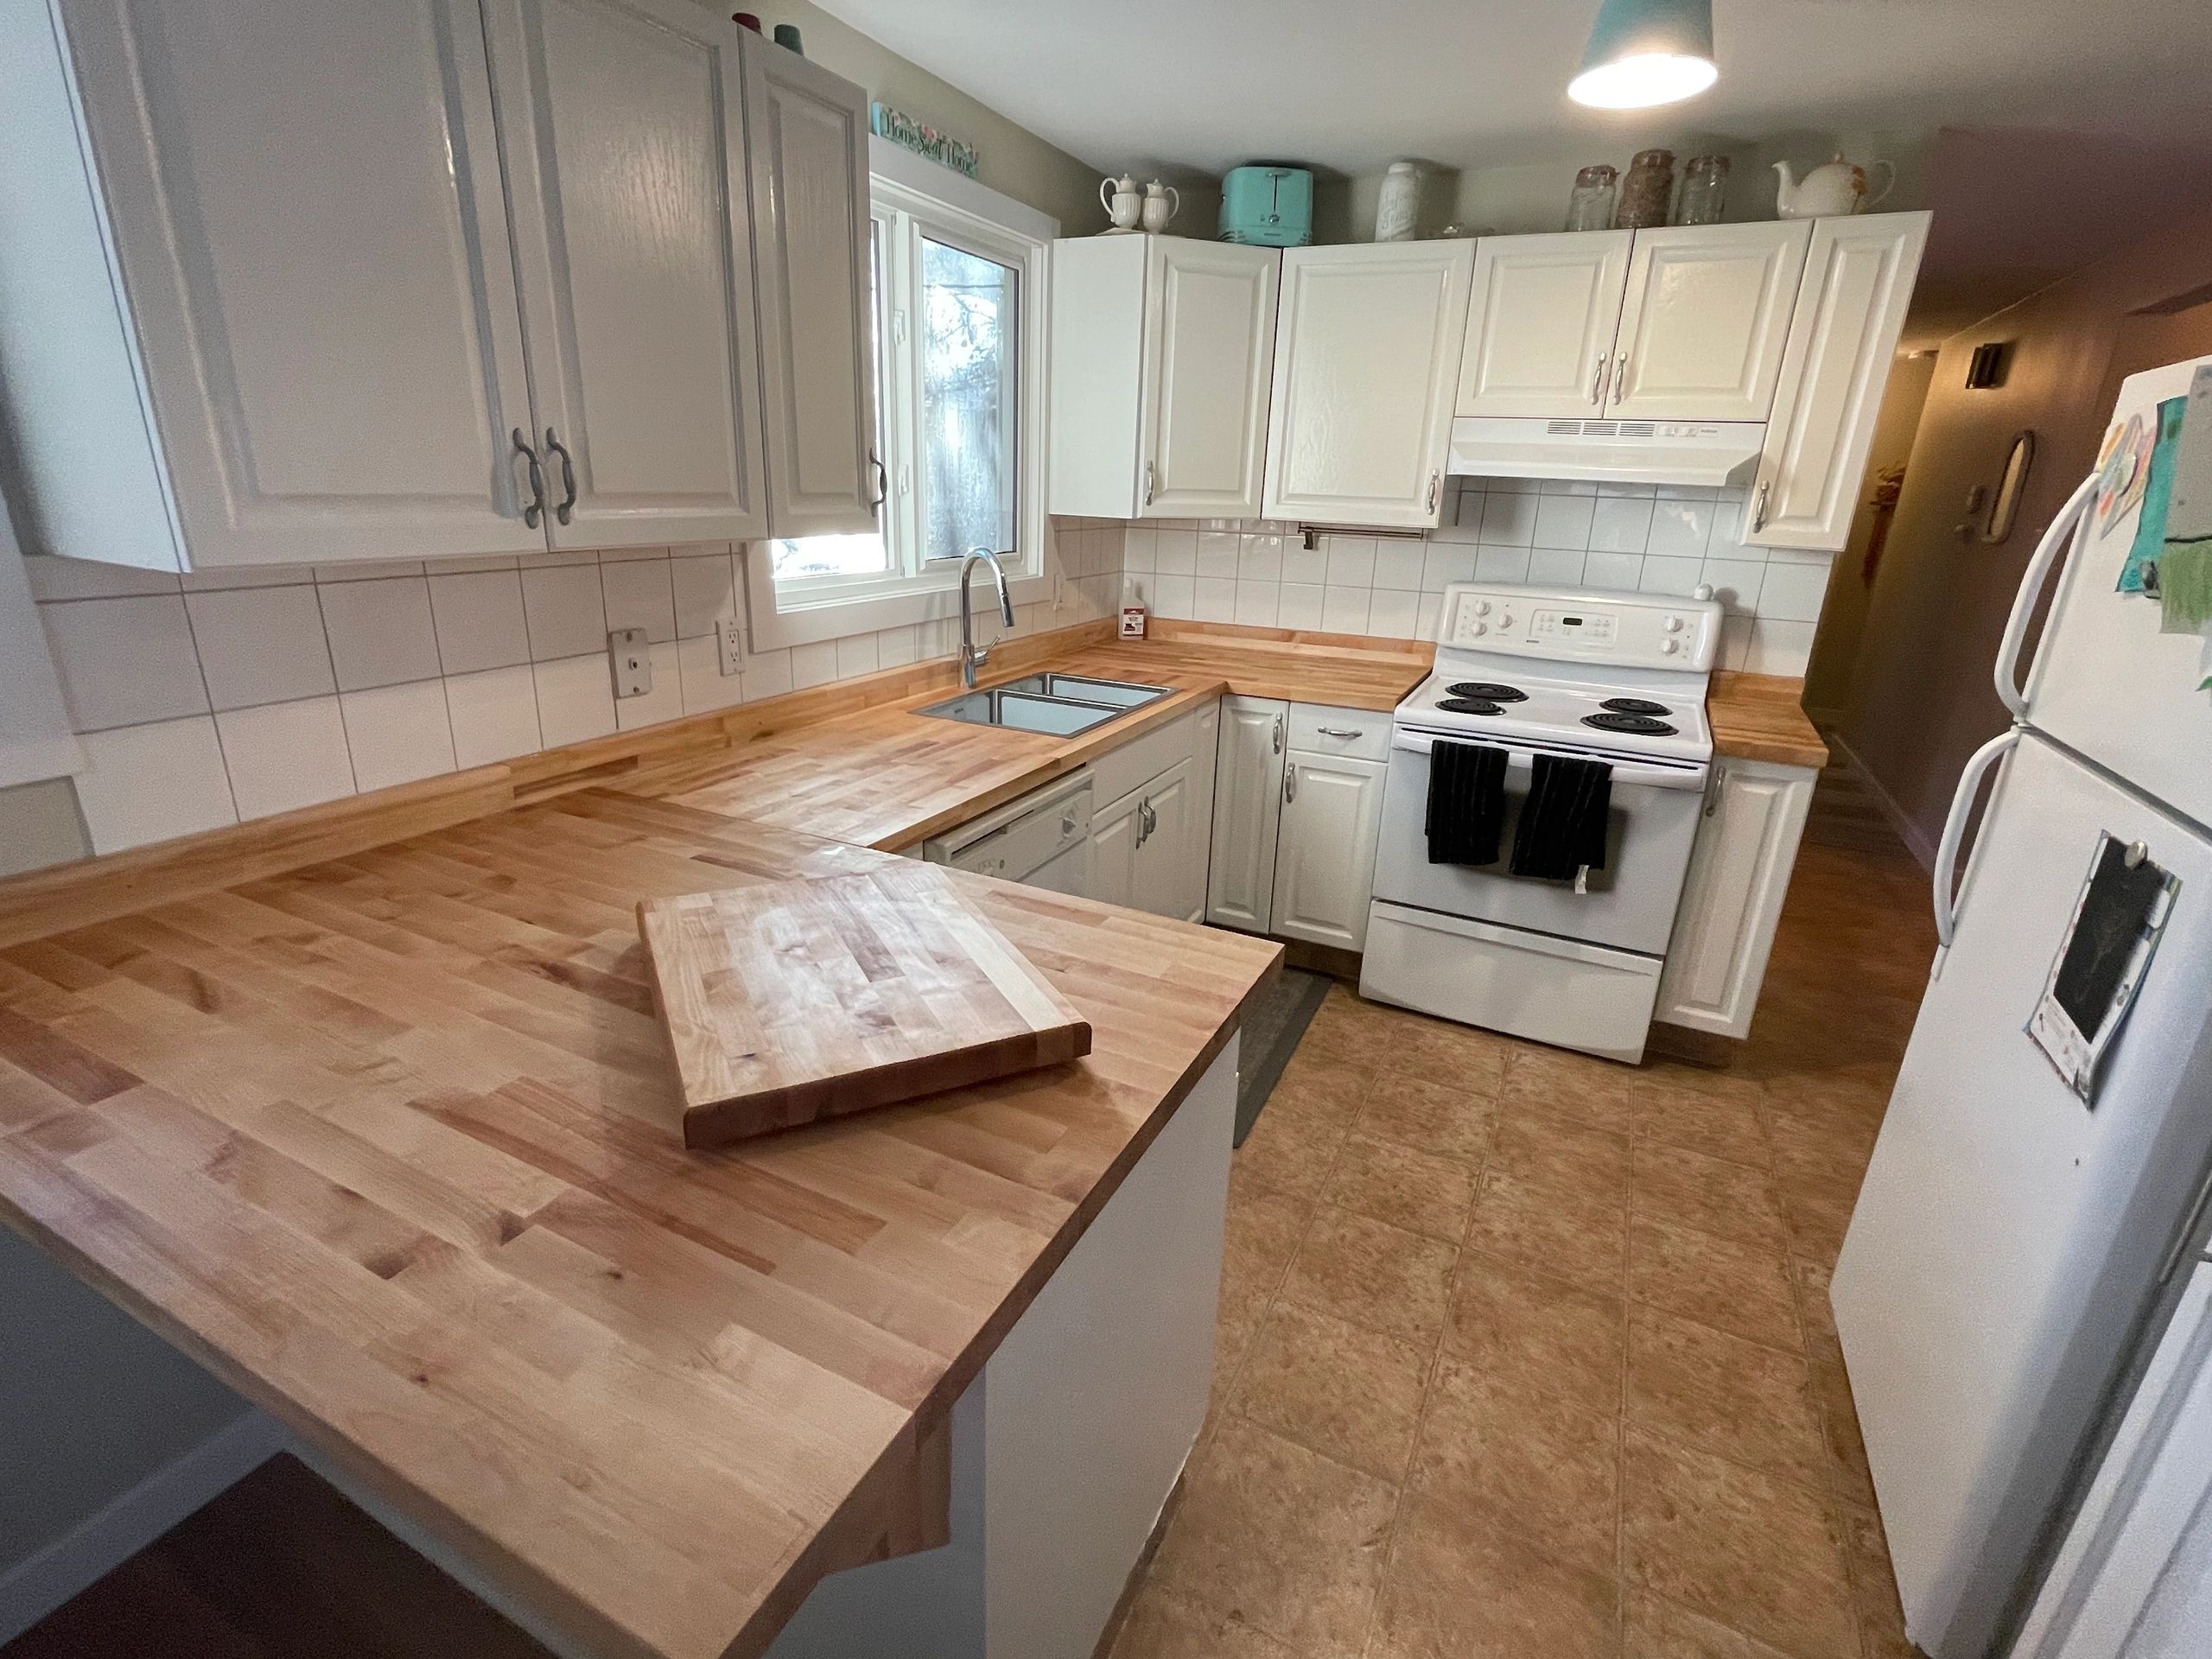 We updated this kitchen with a beautiful butcher block counter top.  Had some extra to make a cuttin